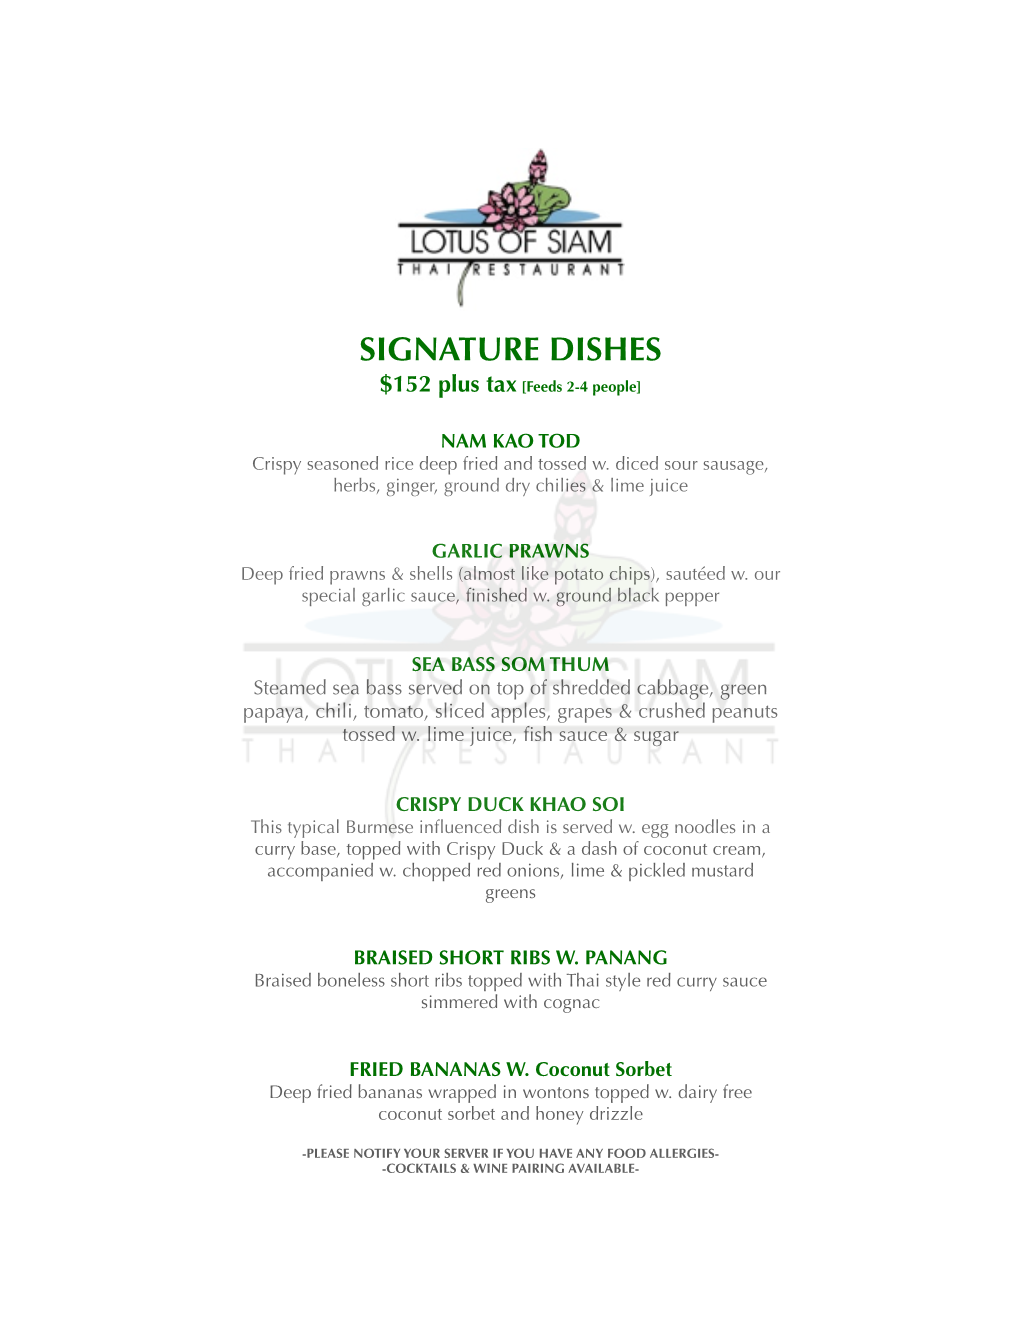 SIGNATURE DISHES $152 Plus Tax [Feeds 2-4 People]